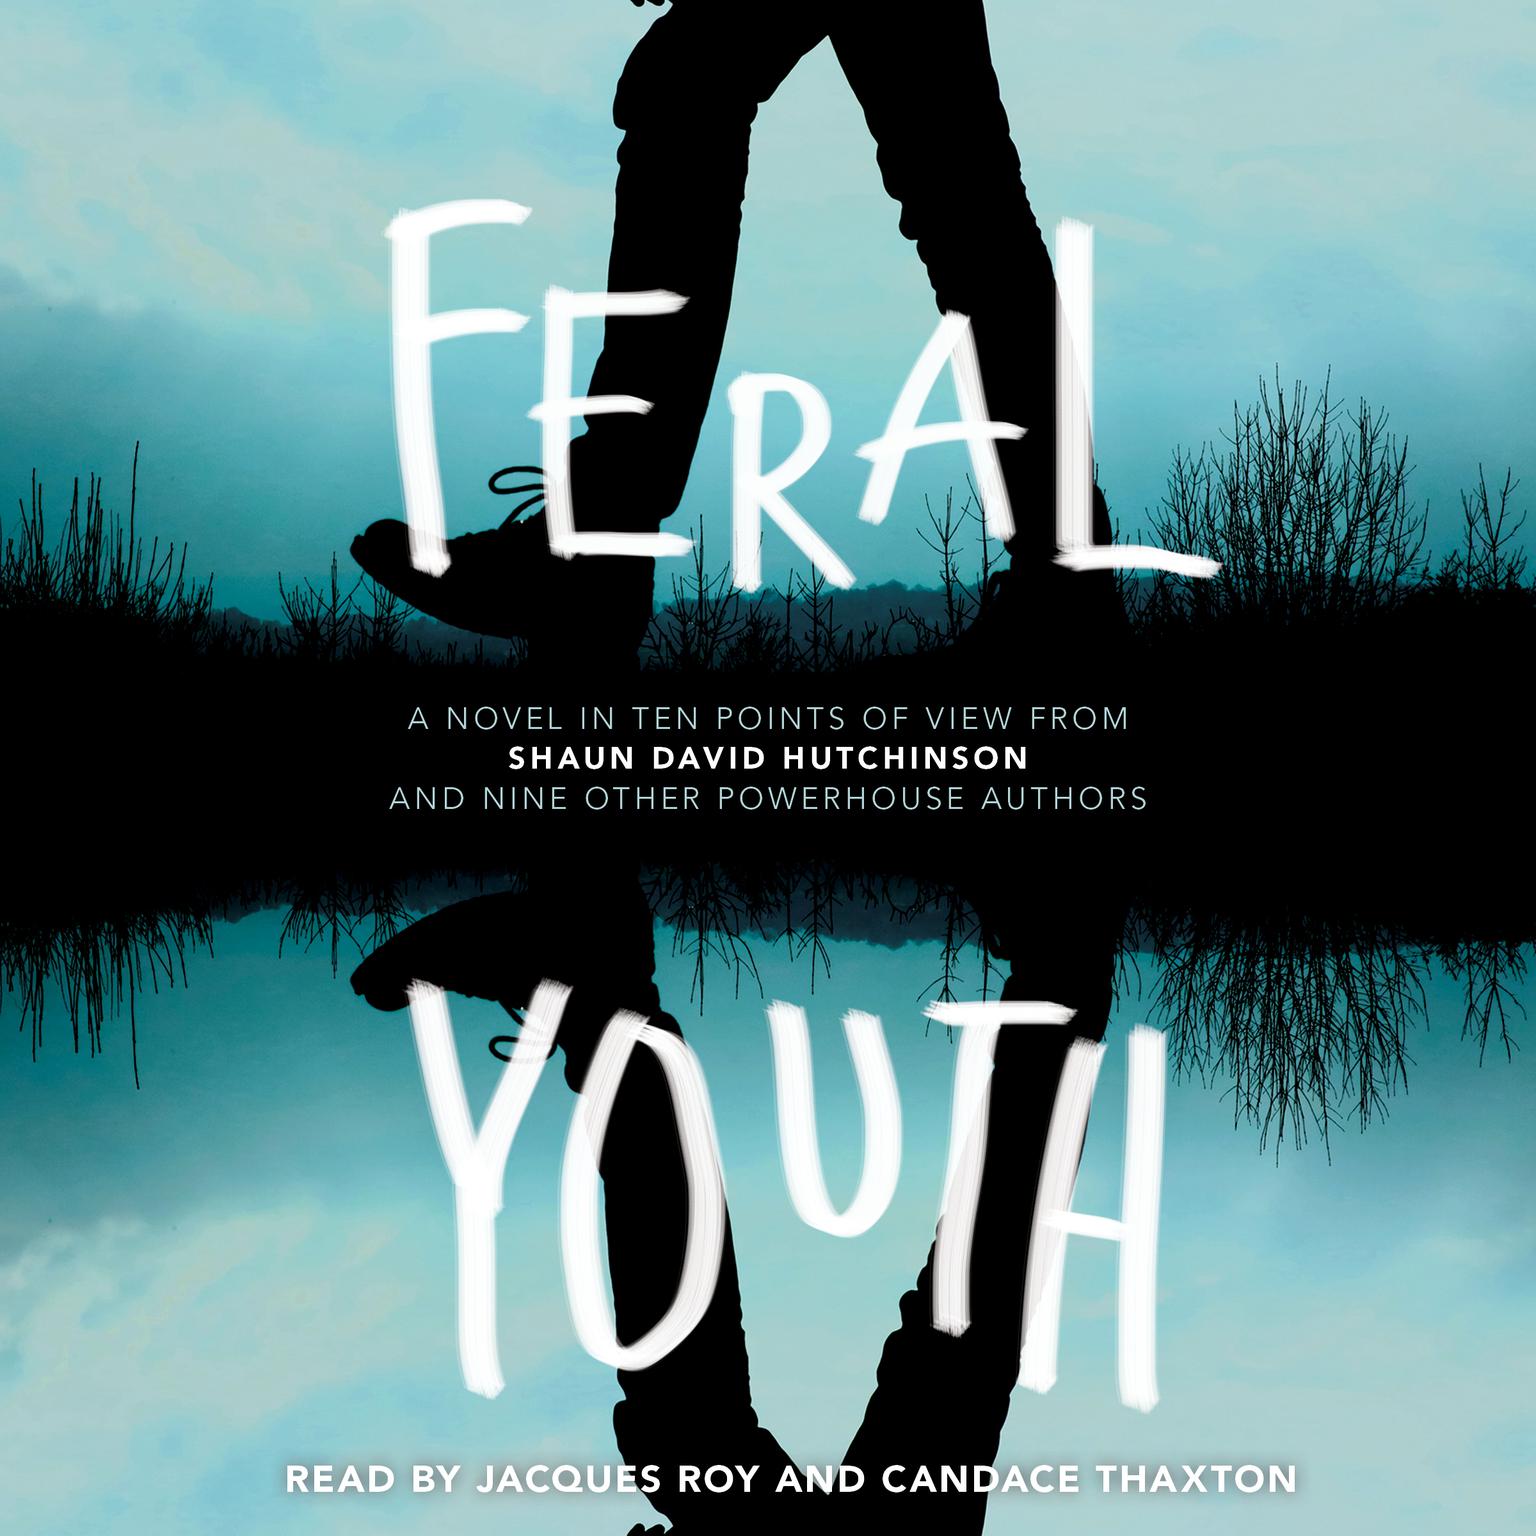 Feral Youth Audiobook, by Tim Floreen